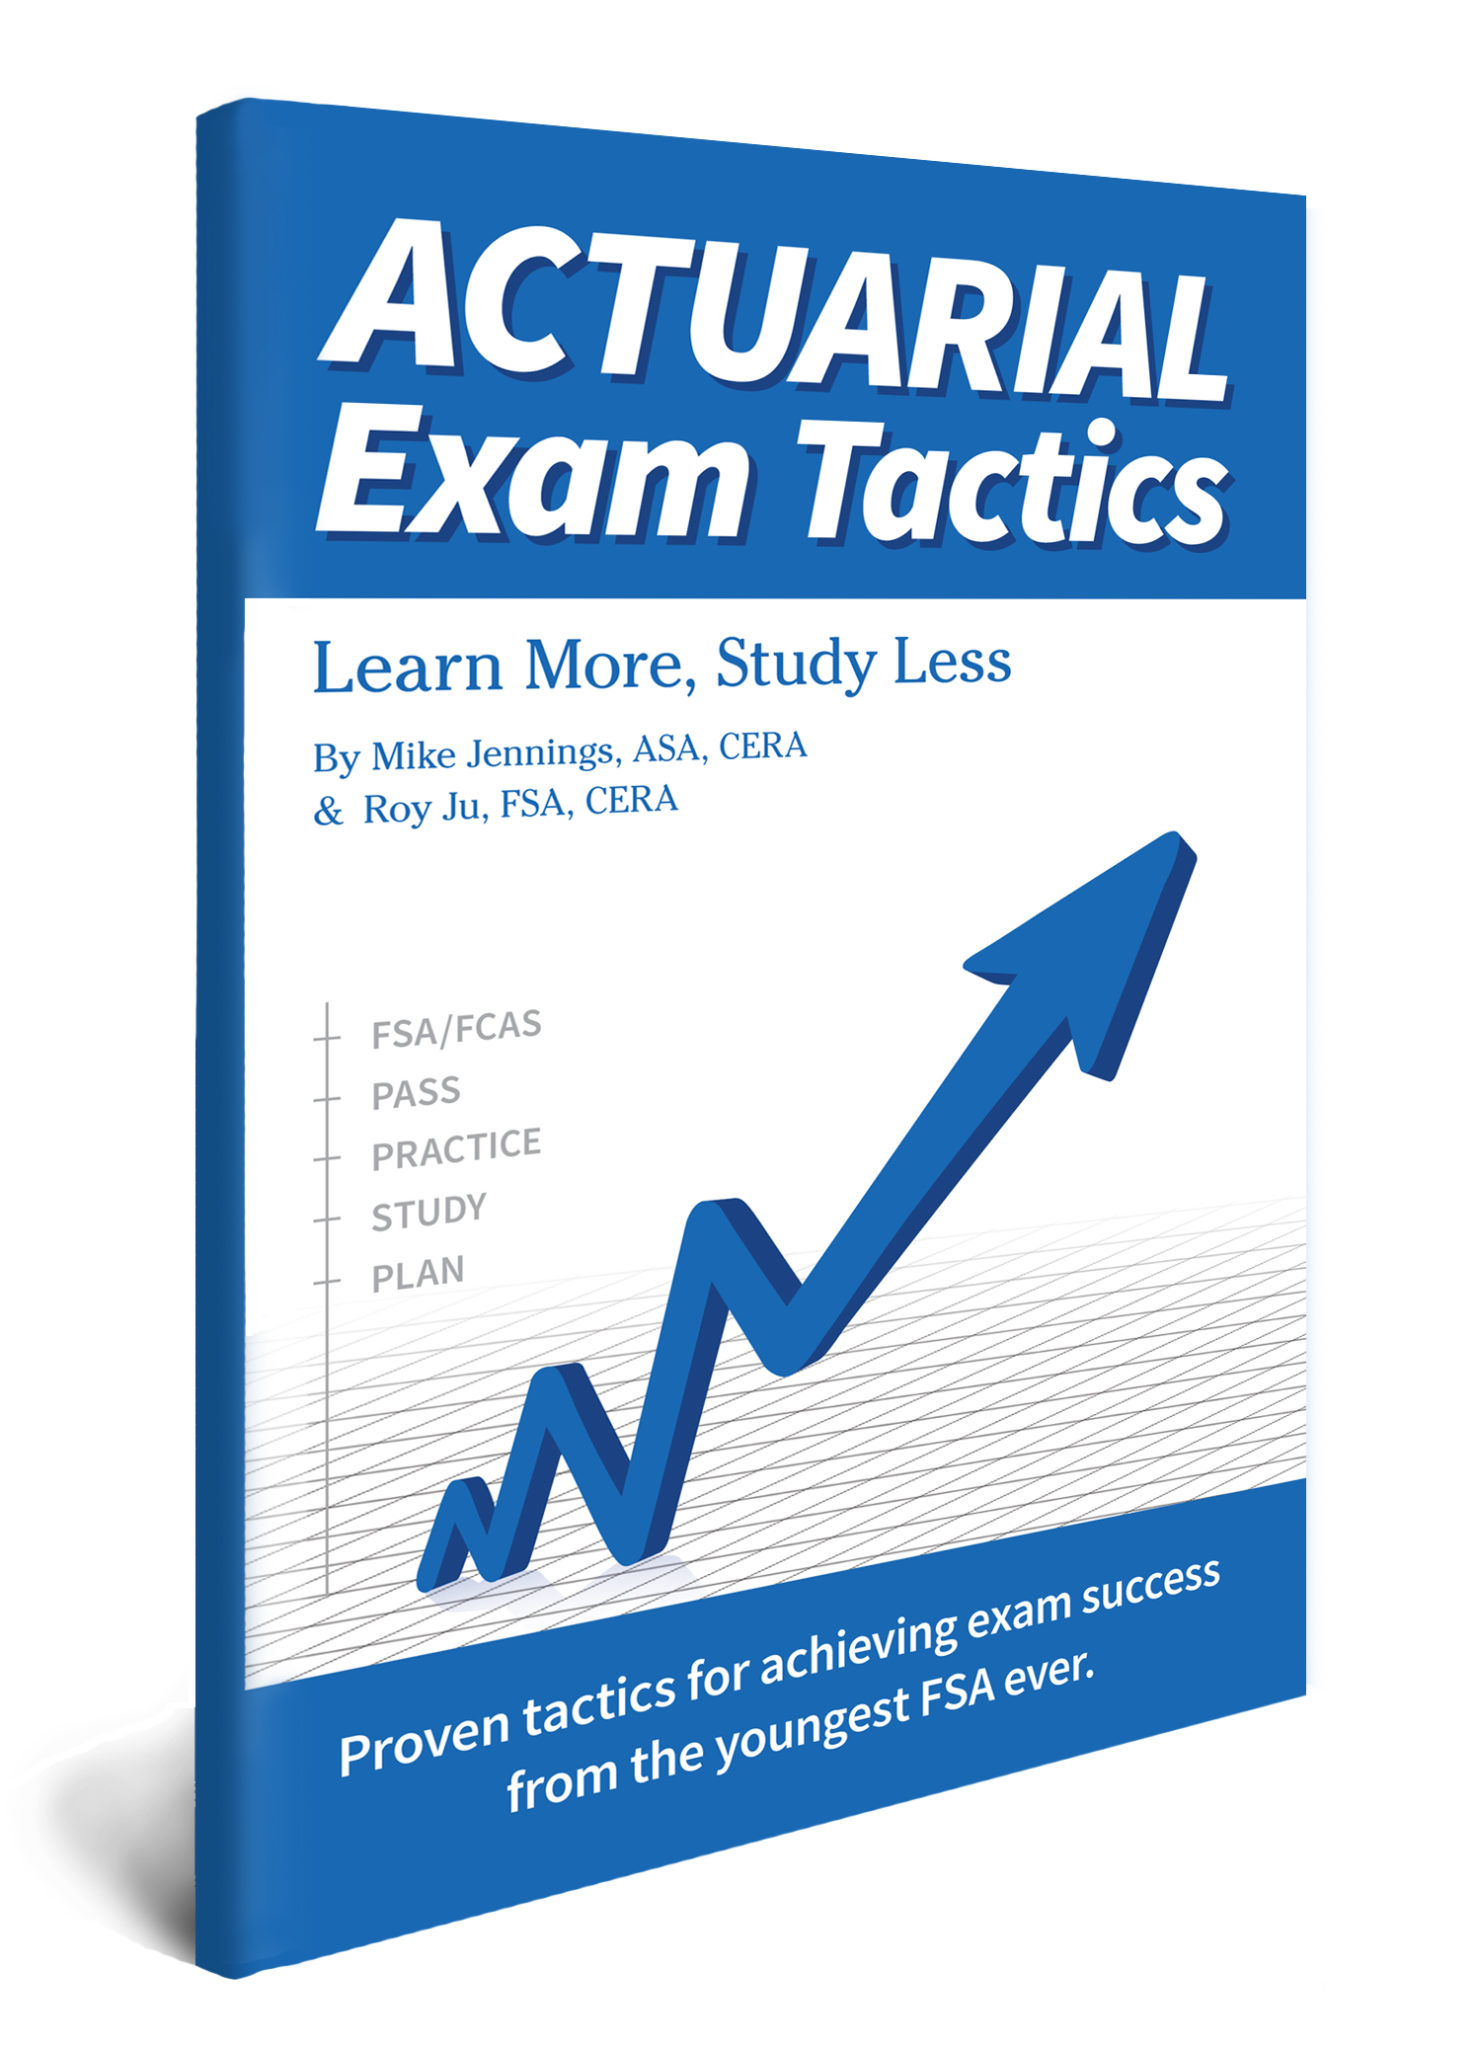 Actuarial Exam Study Resources - Learn More Study Less